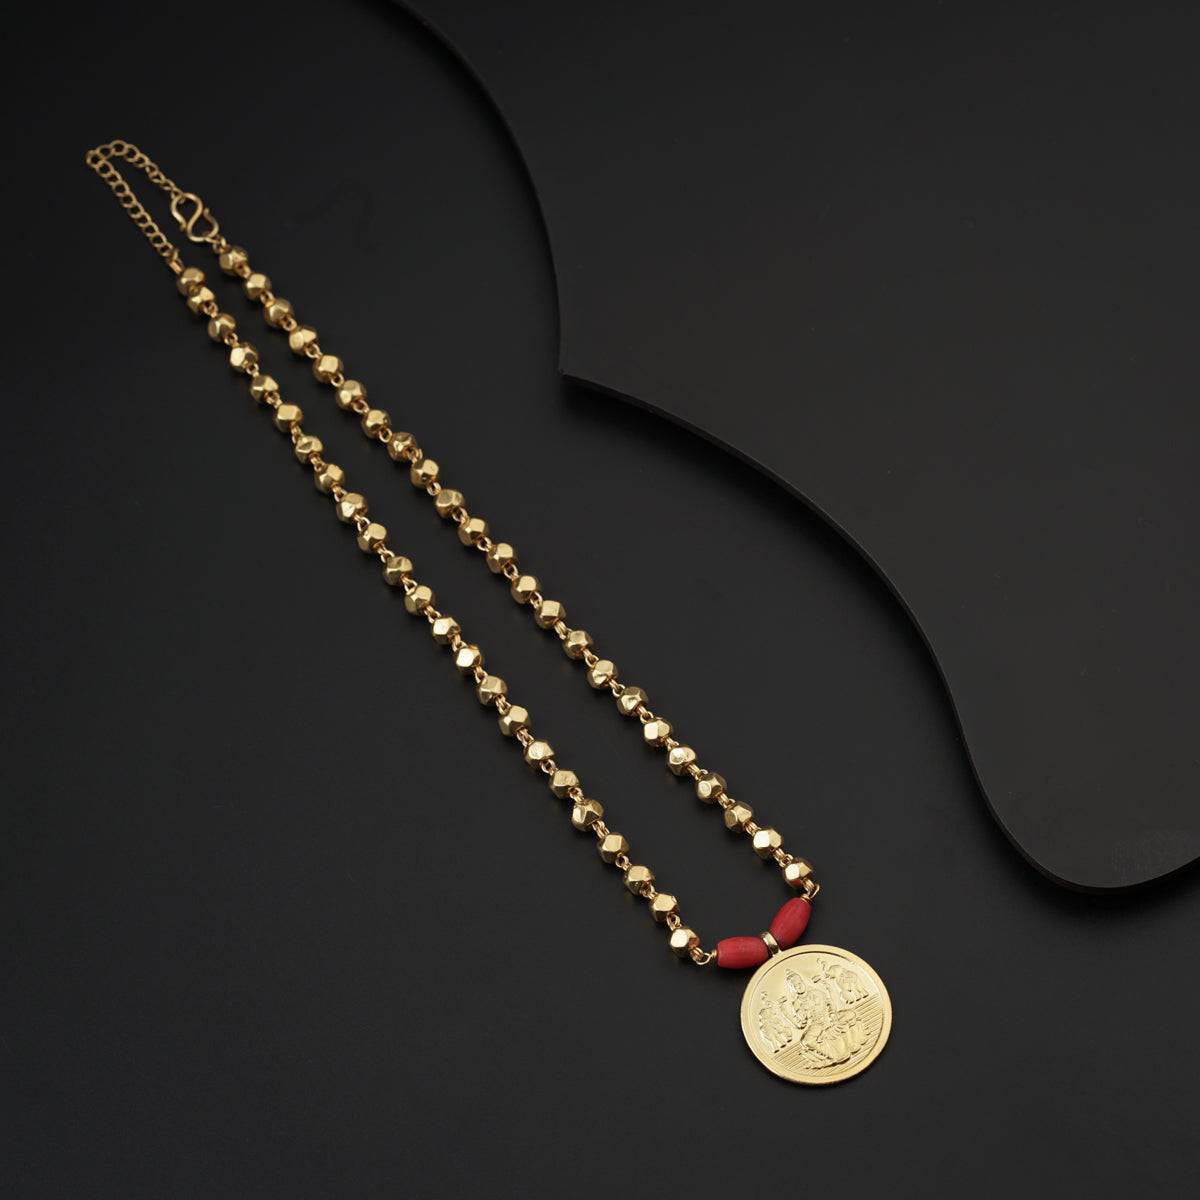 Silver Coin Necklace with Silver Beads (Gold Plated)